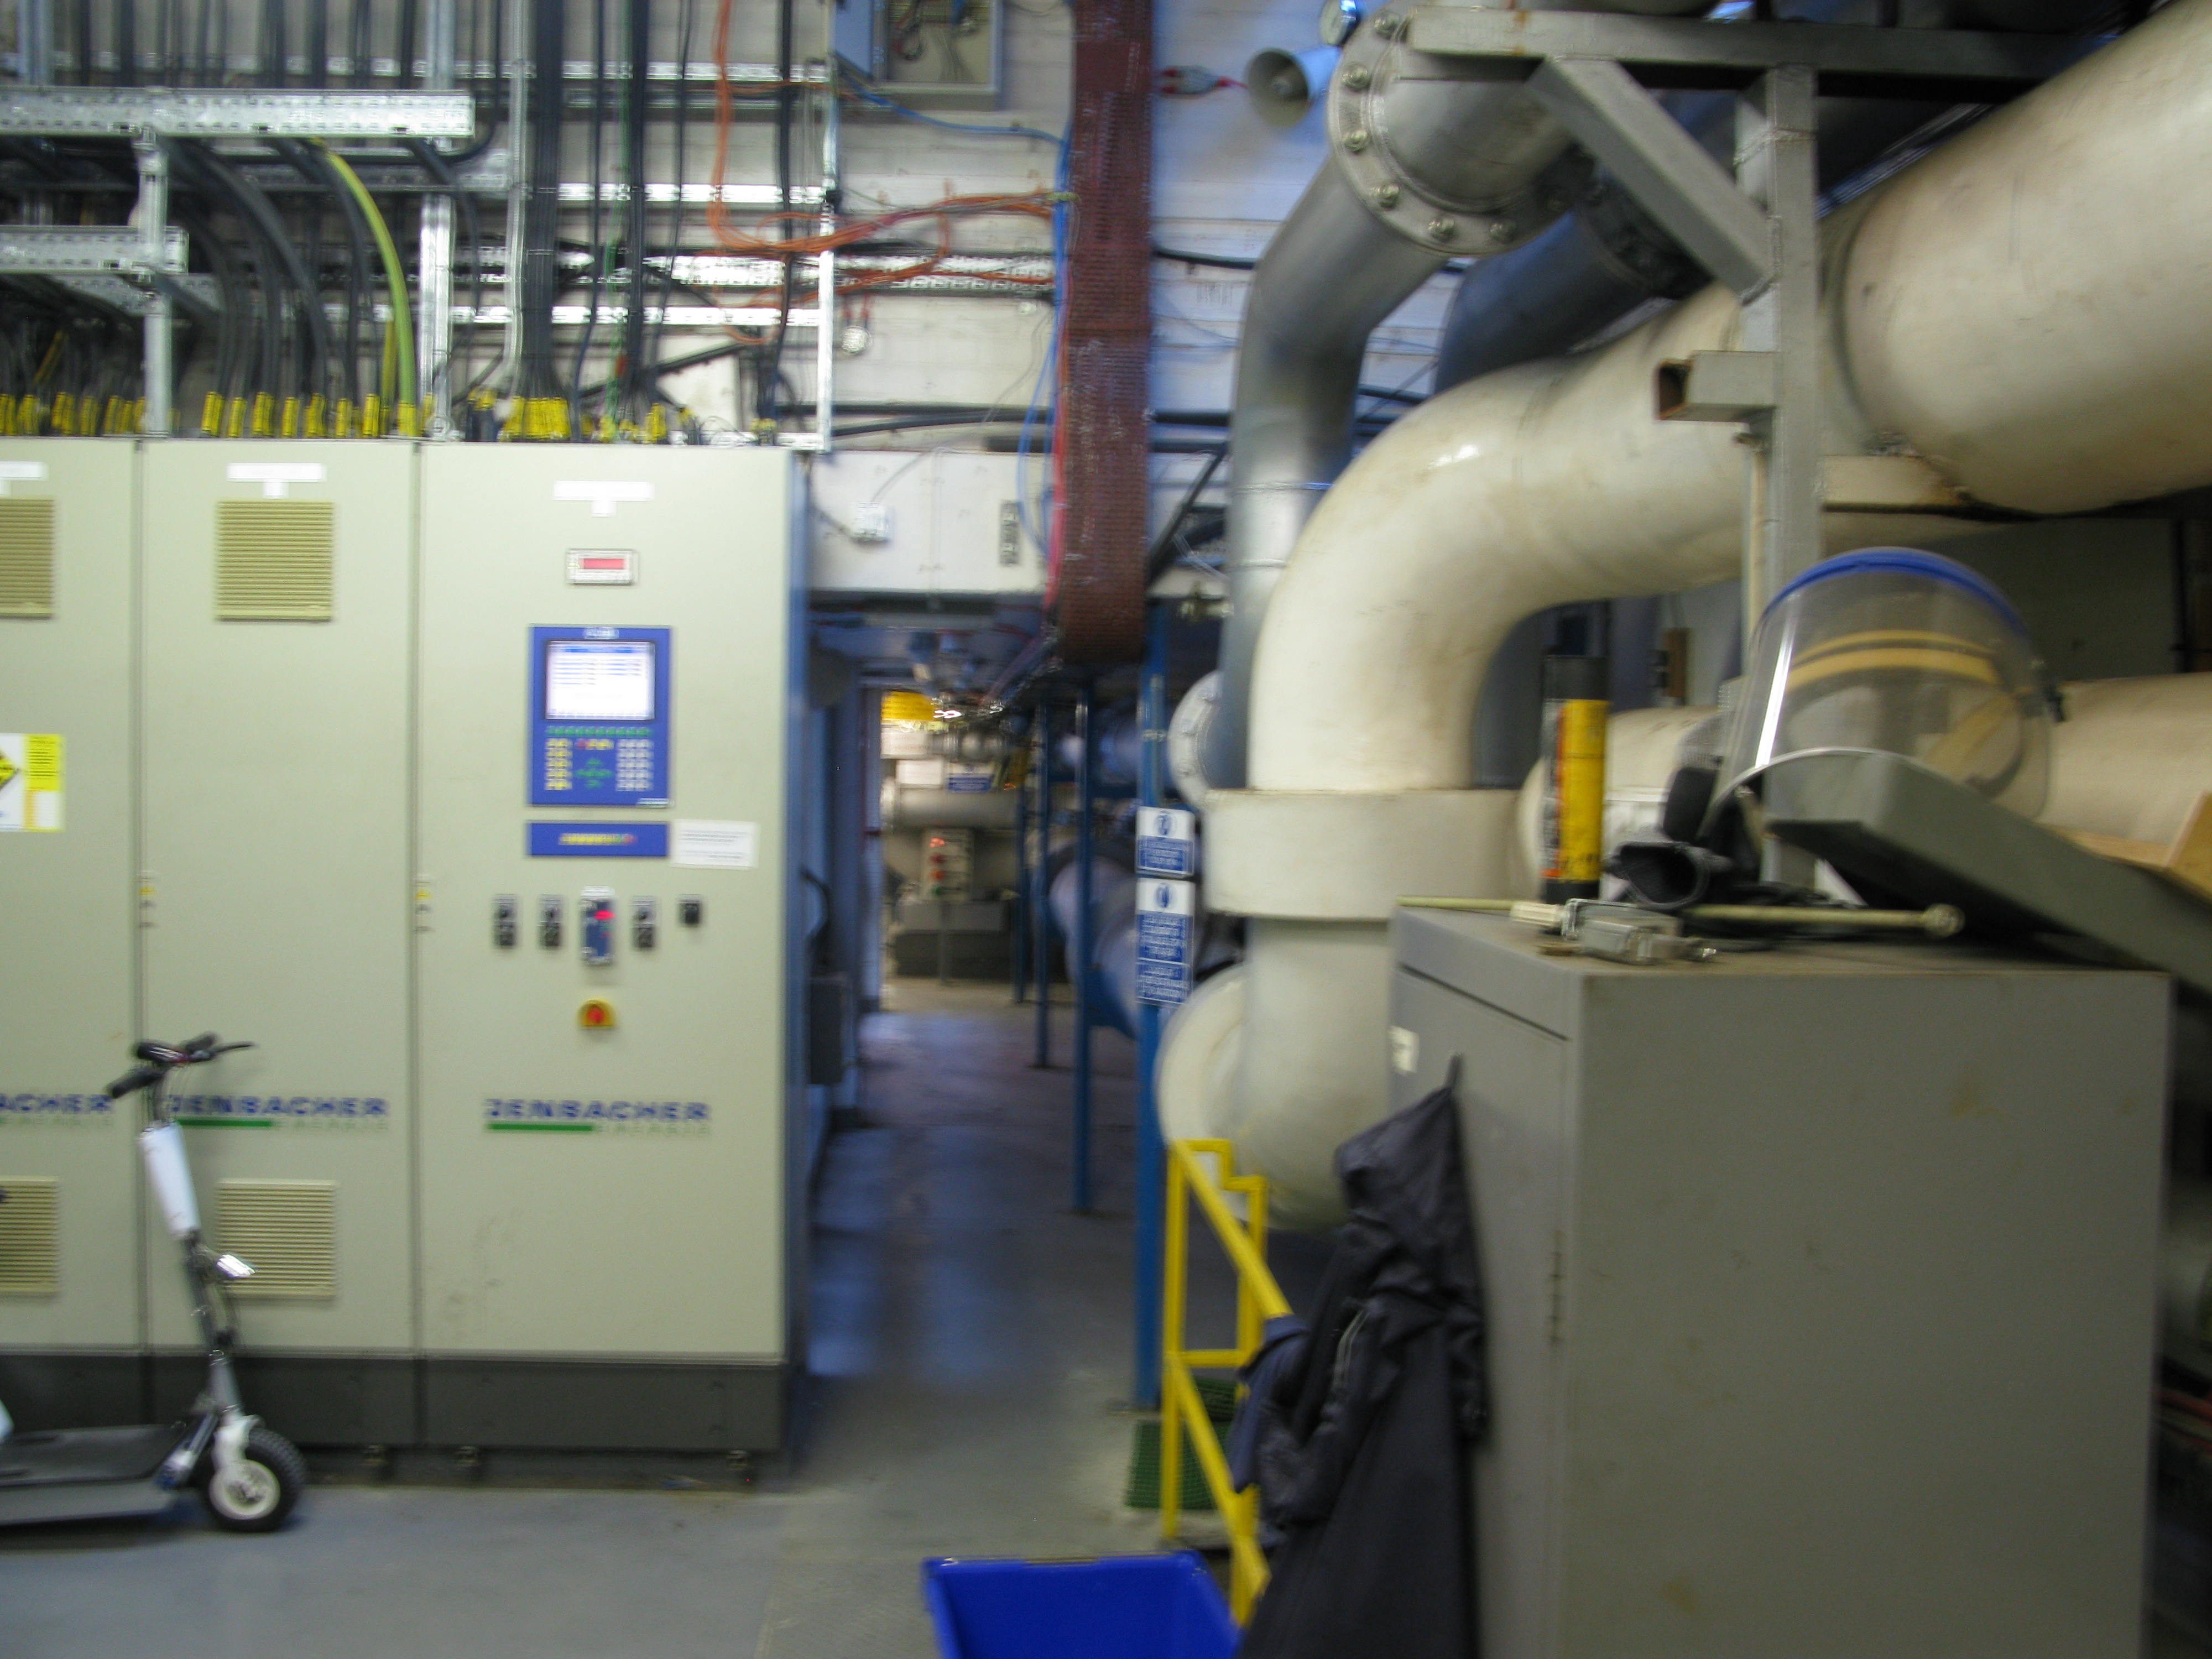 CHP control panels and Chilled Water mains